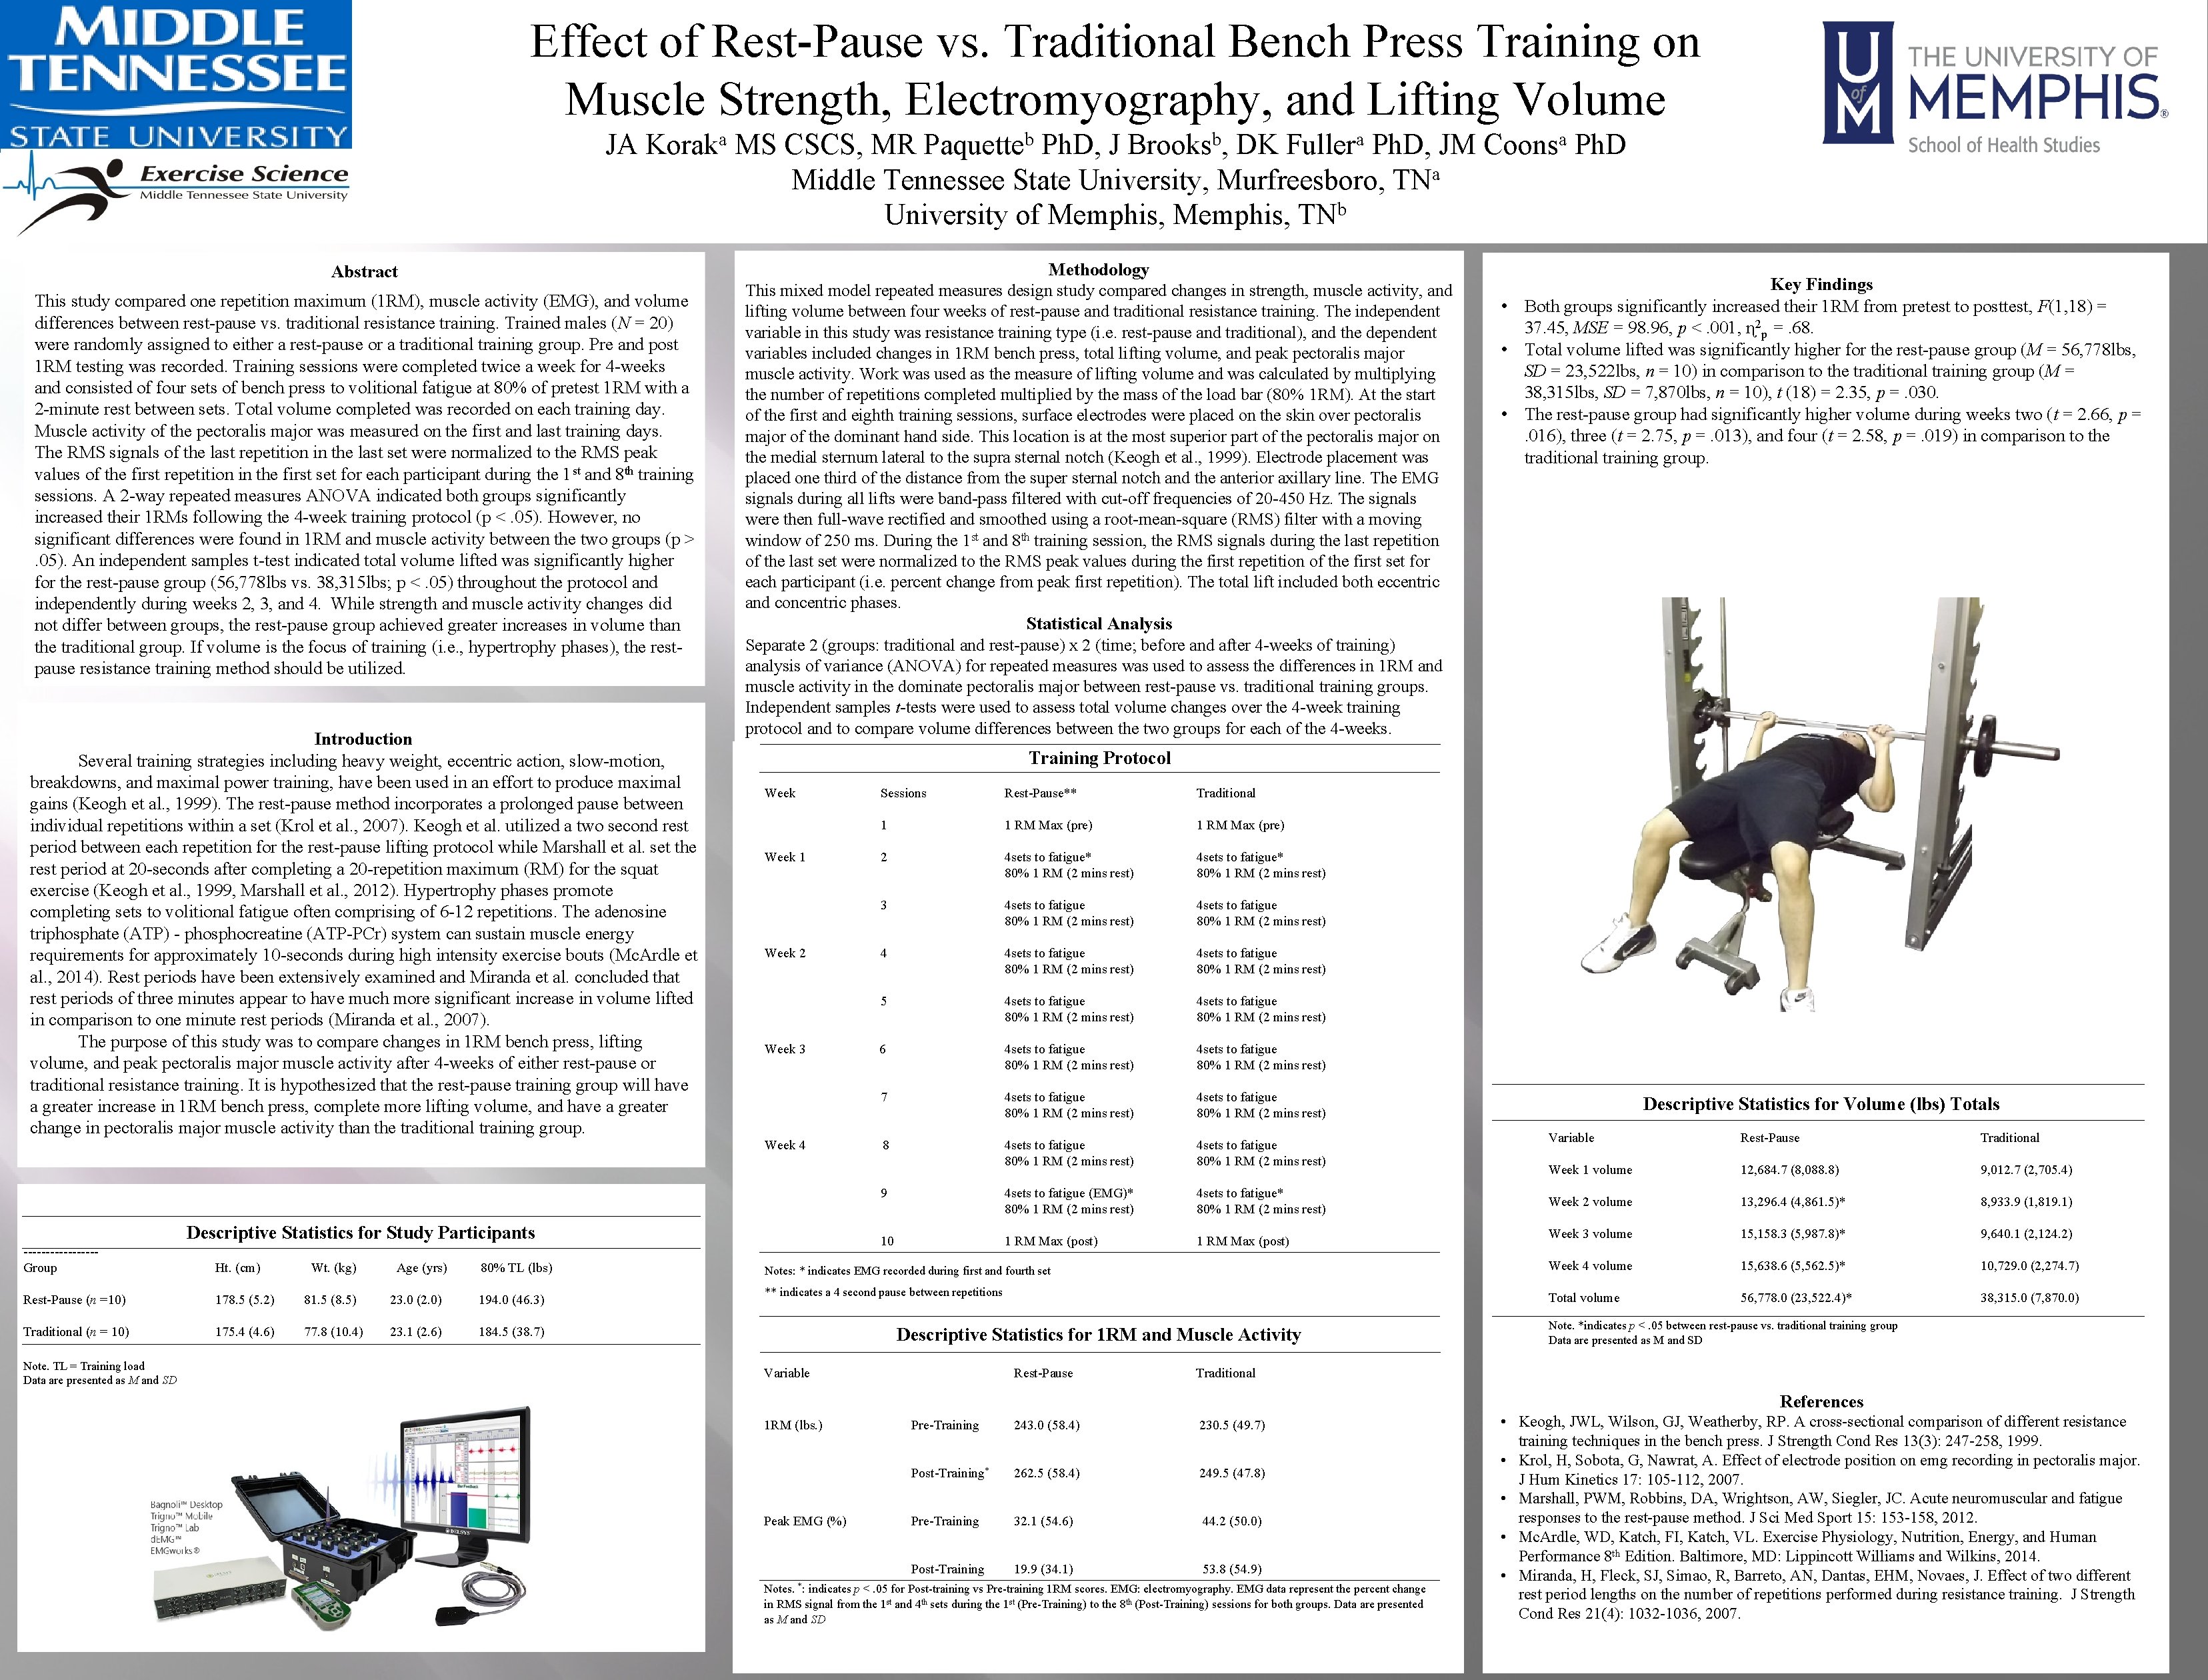 Effect of Rest Pause vs. Traditional Bench Press Training on Muscle Strength, Electromyography, and